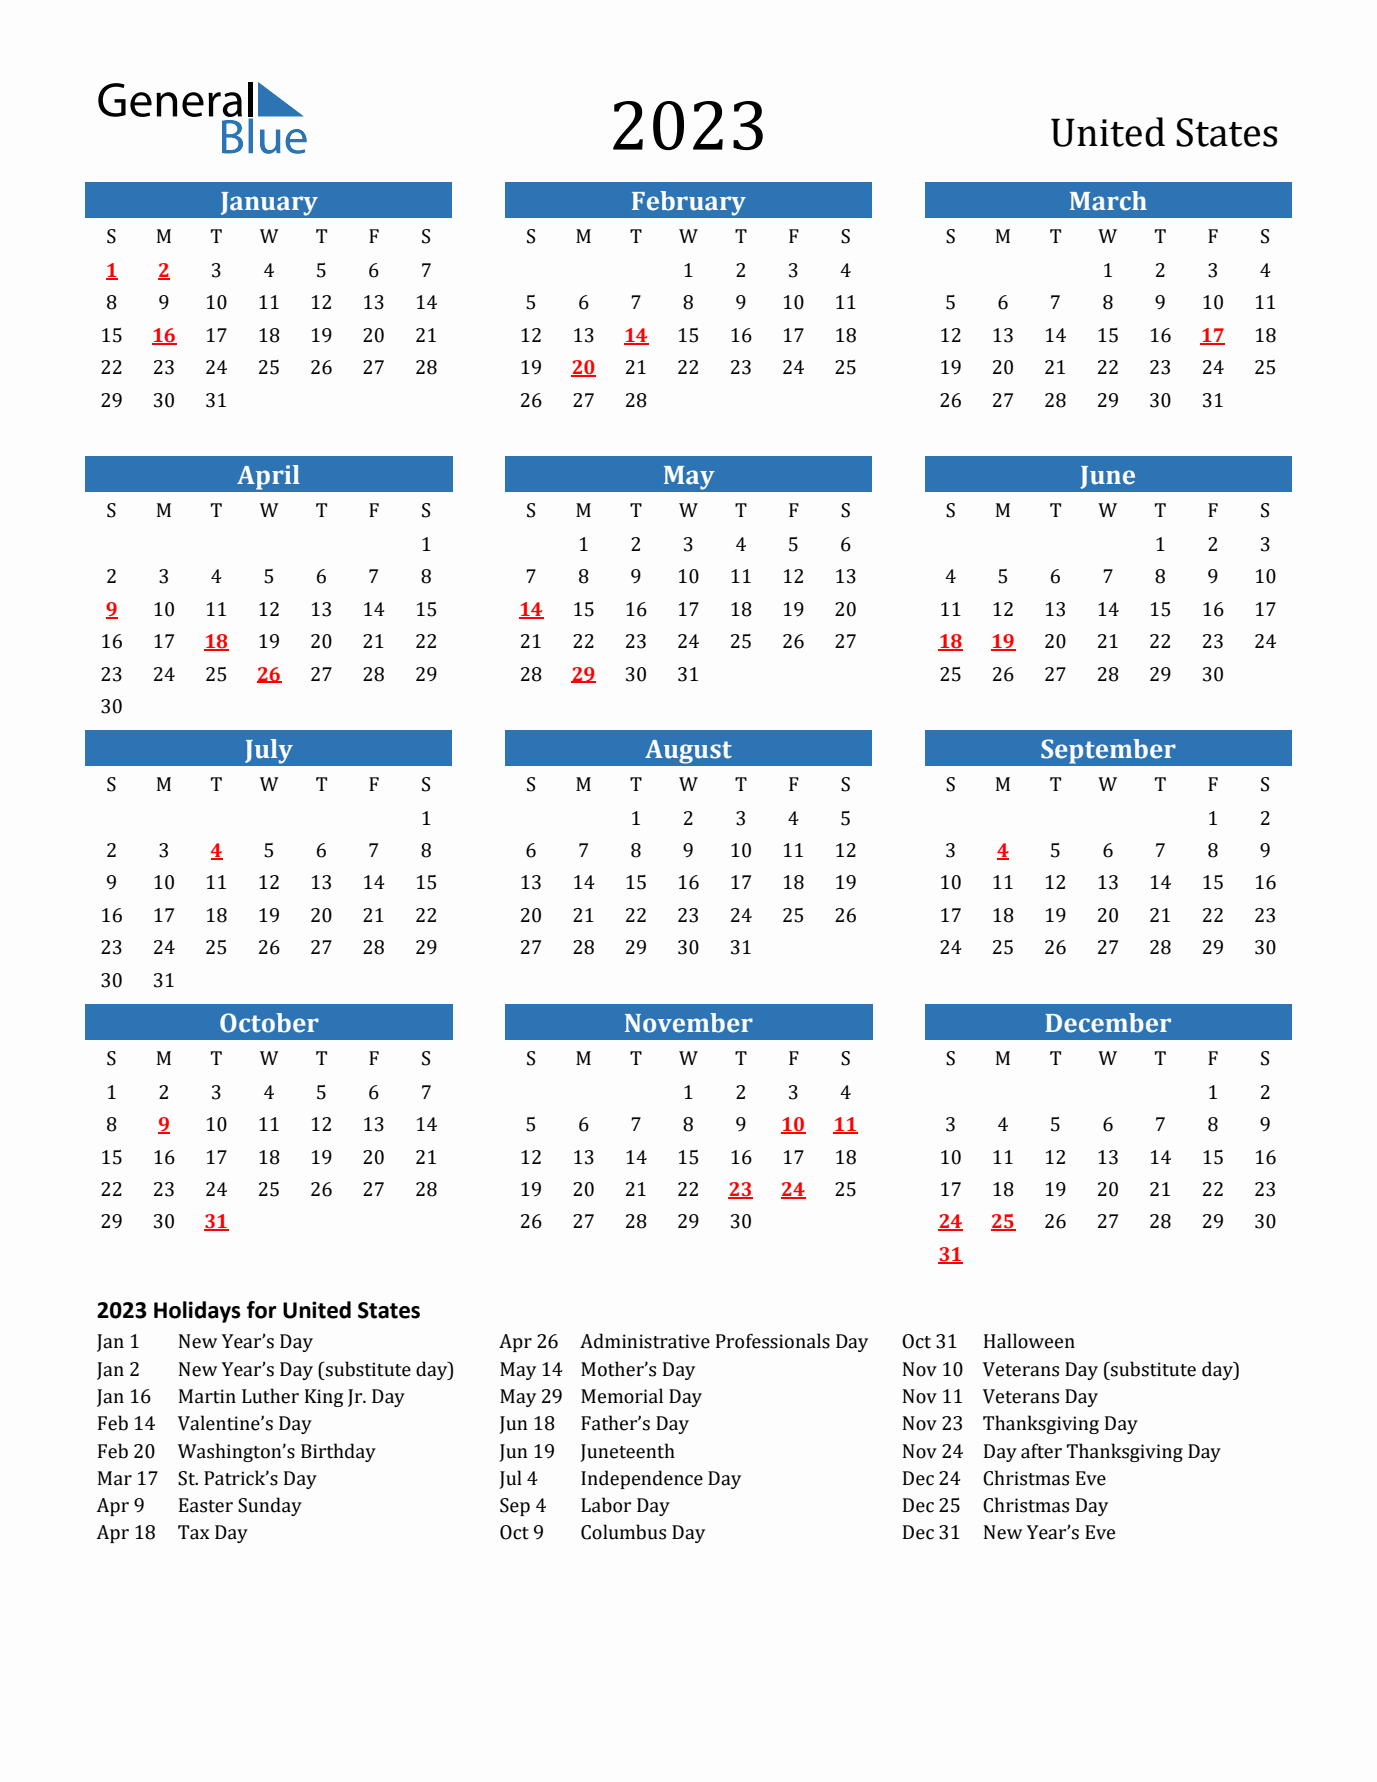 2023 yearly calendar with United States holidays